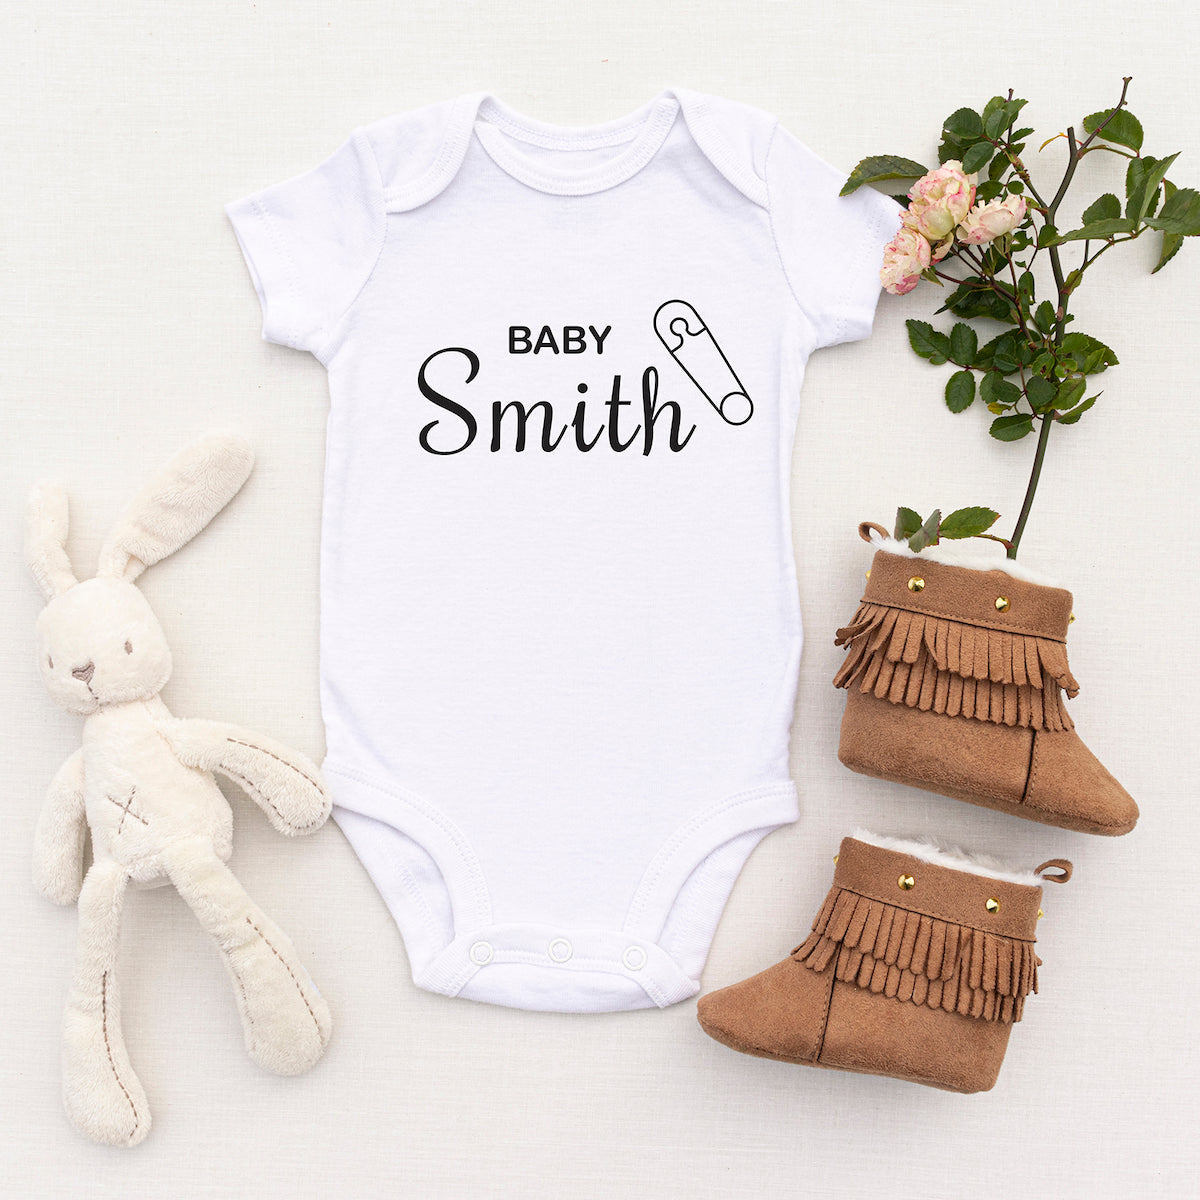 Personalised White Baby Body Suit Grow Vest - Clip Paper